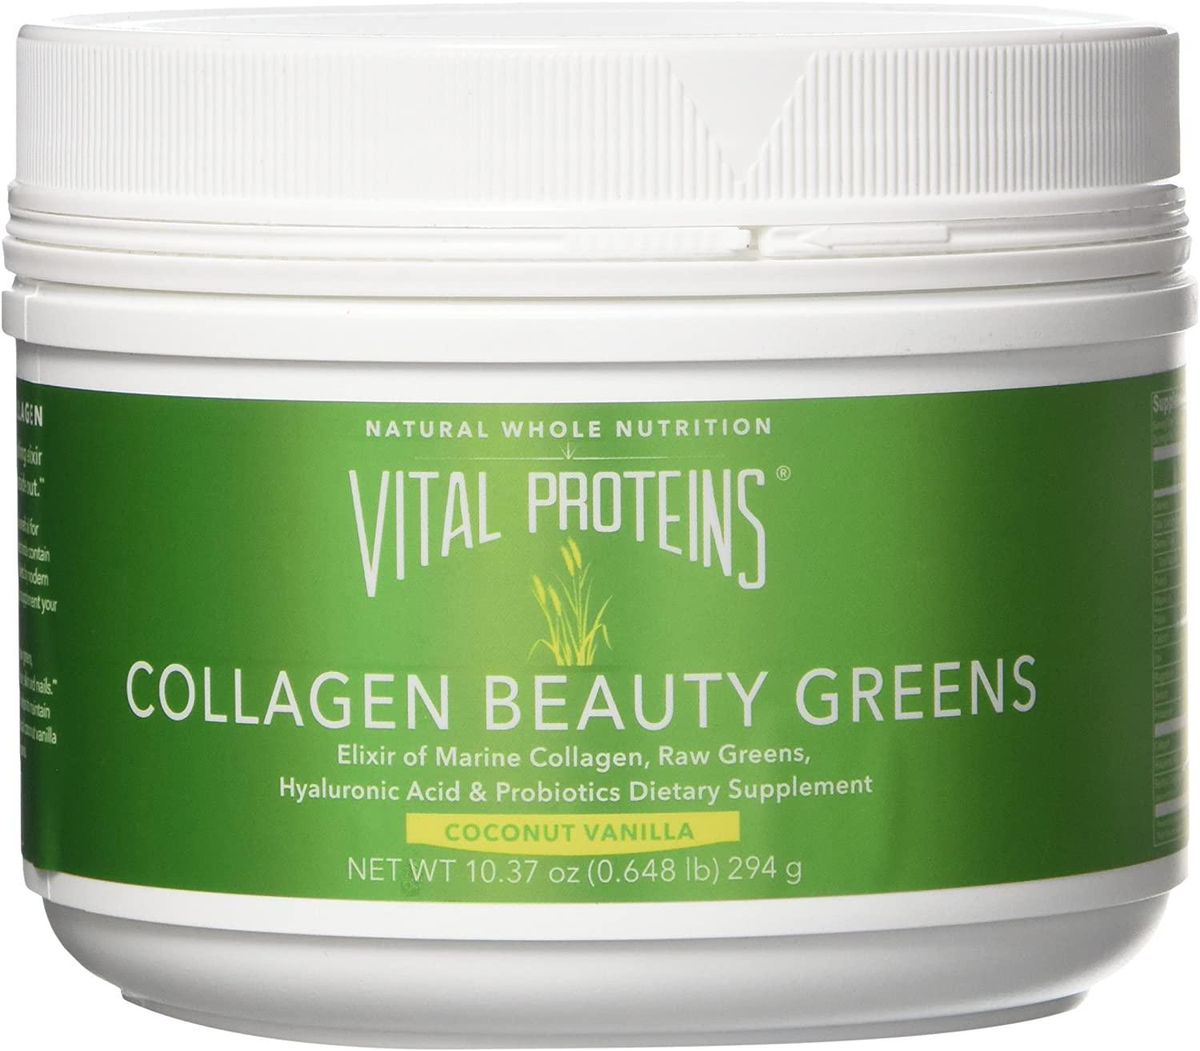 vital proteins collagen beauty greens